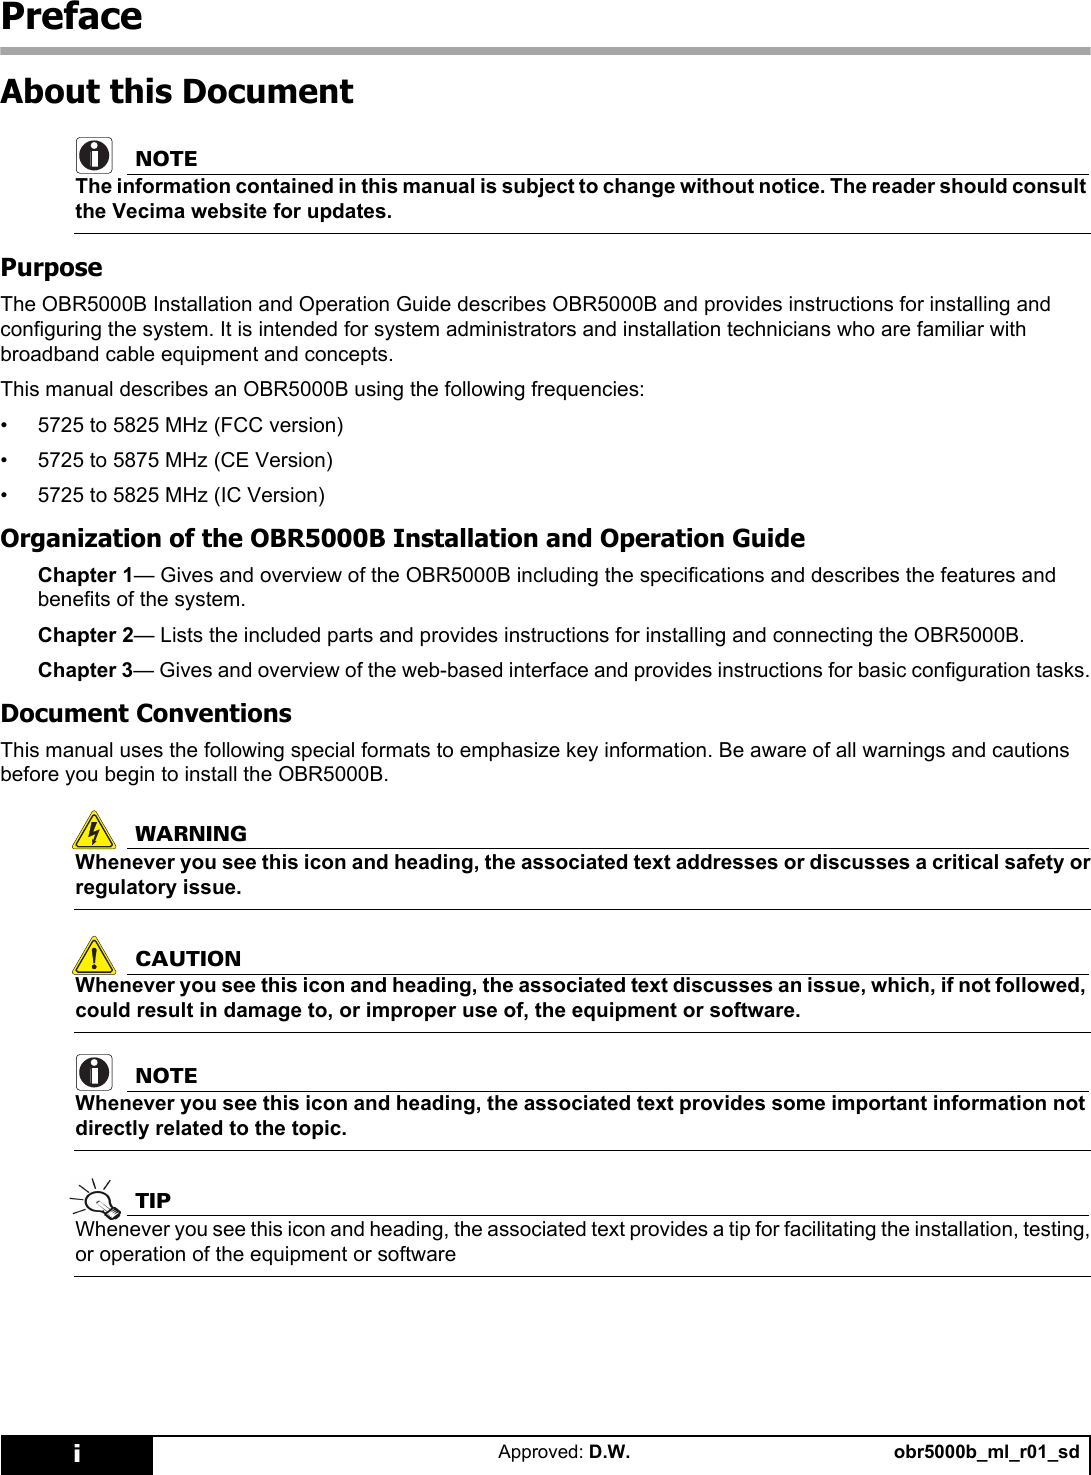 obr5000b_ml_r01_sdApproved: D.W.iPrefaceAbout this DocumentNOTEThe information contained in this manual is subject to change without notice. The reader should consult the Vecima website for updates.PurposeThe OBR5000B Installation and Operation Guide describes OBR5000B and provides instructions for installing and configuring the system. It is intended for system administrators and installation technicians who are familiar with broadband cable equipment and concepts.This manual describes an OBR5000B using the following frequencies:• 5725 to 5825 MHz (FCC version)• 5725 to 5875 MHz (CE Version)• 5725 to 5825 MHz (IC Version)Organization of the OBR5000B Installation and Operation GuideChapter 1— Gives and overview of the OBR5000B including the specifications and describes the features and benefits of the system.Chapter 2— Lists the included parts and provides instructions for installing and connecting the OBR5000B.Chapter 3— Gives and overview of the web-based interface and provides instructions for basic configuration tasks.Document ConventionsThis manual uses the following special formats to emphasize key information. Be aware of all warnings and cautions before you begin to install the OBR5000B.WARNINGWhenever you see this icon and heading, the associated text addresses or discusses a critical safety or regulatory issue.CAUTIONWhenever you see this icon and heading, the associated text discusses an issue, which, if not followed, could result in damage to, or improper use of, the equipment or software.NOTEWhenever you see this icon and heading, the associated text provides some important information not directly related to the topic.TIPWhenever you see this icon and heading, the associated text provides a tip for facilitating the installation, testing, or operation of the equipment or software